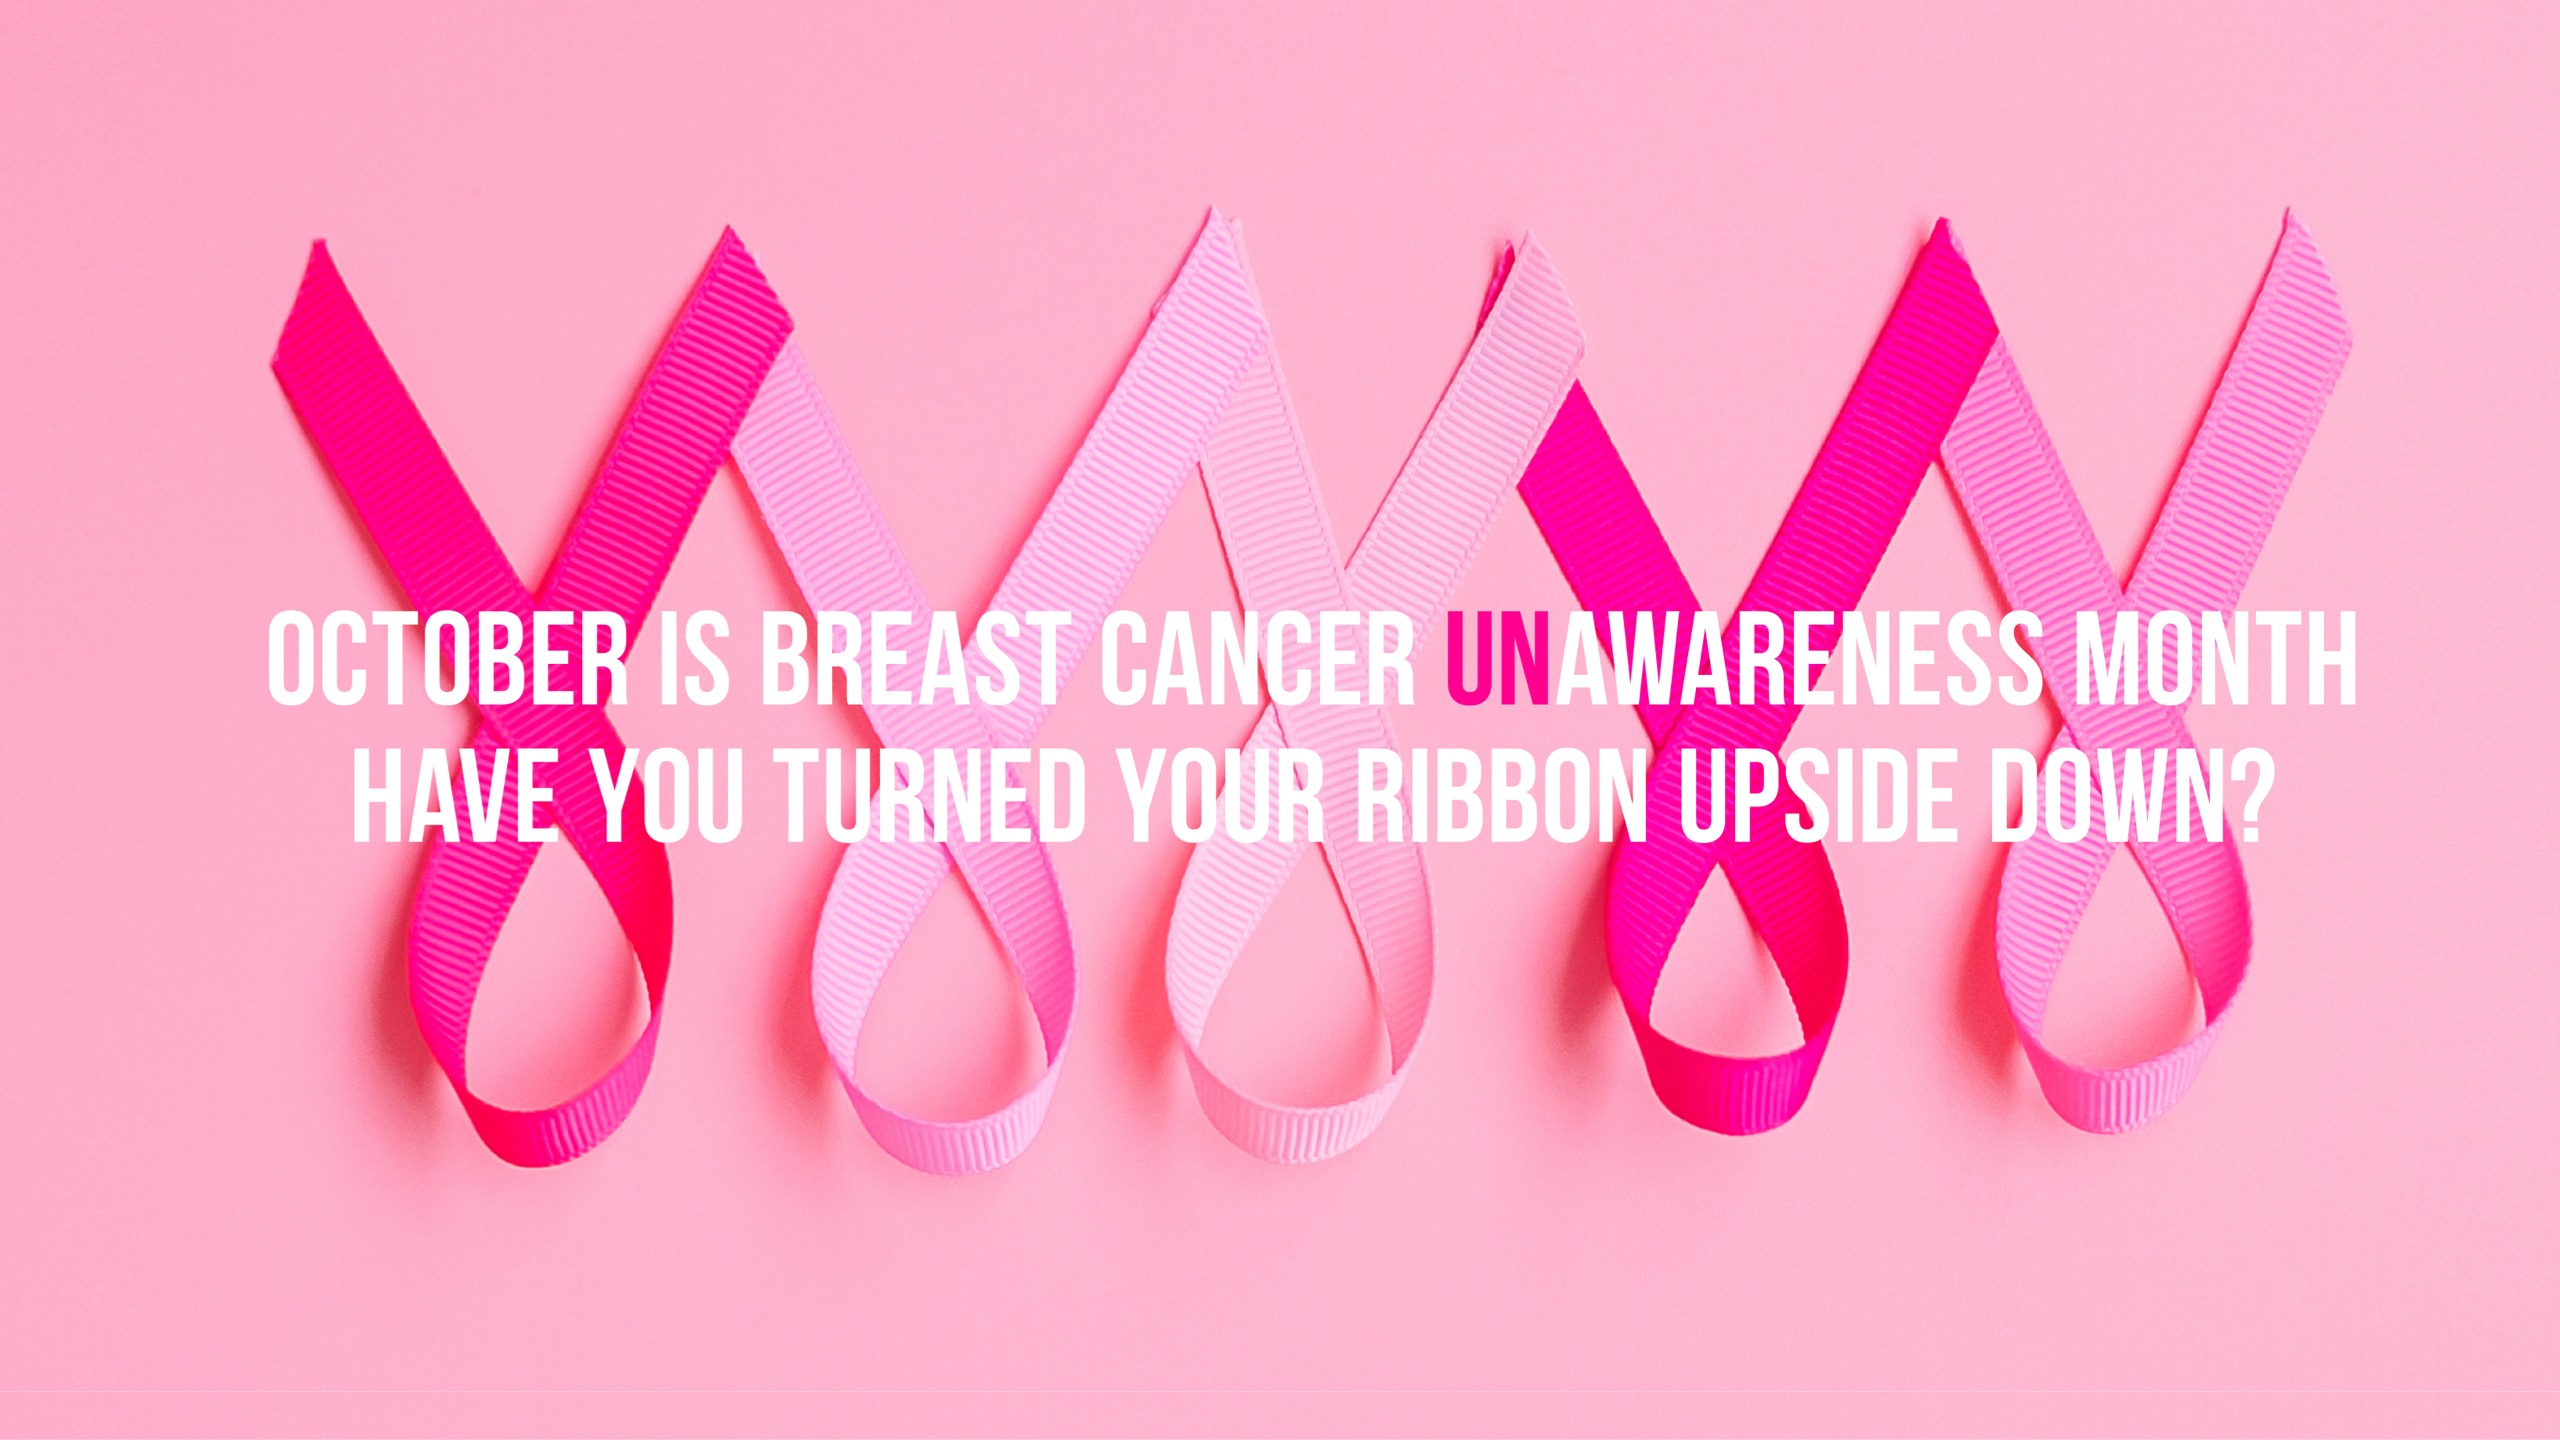 Breast Cancer Unawareness Month - The Pink Fund